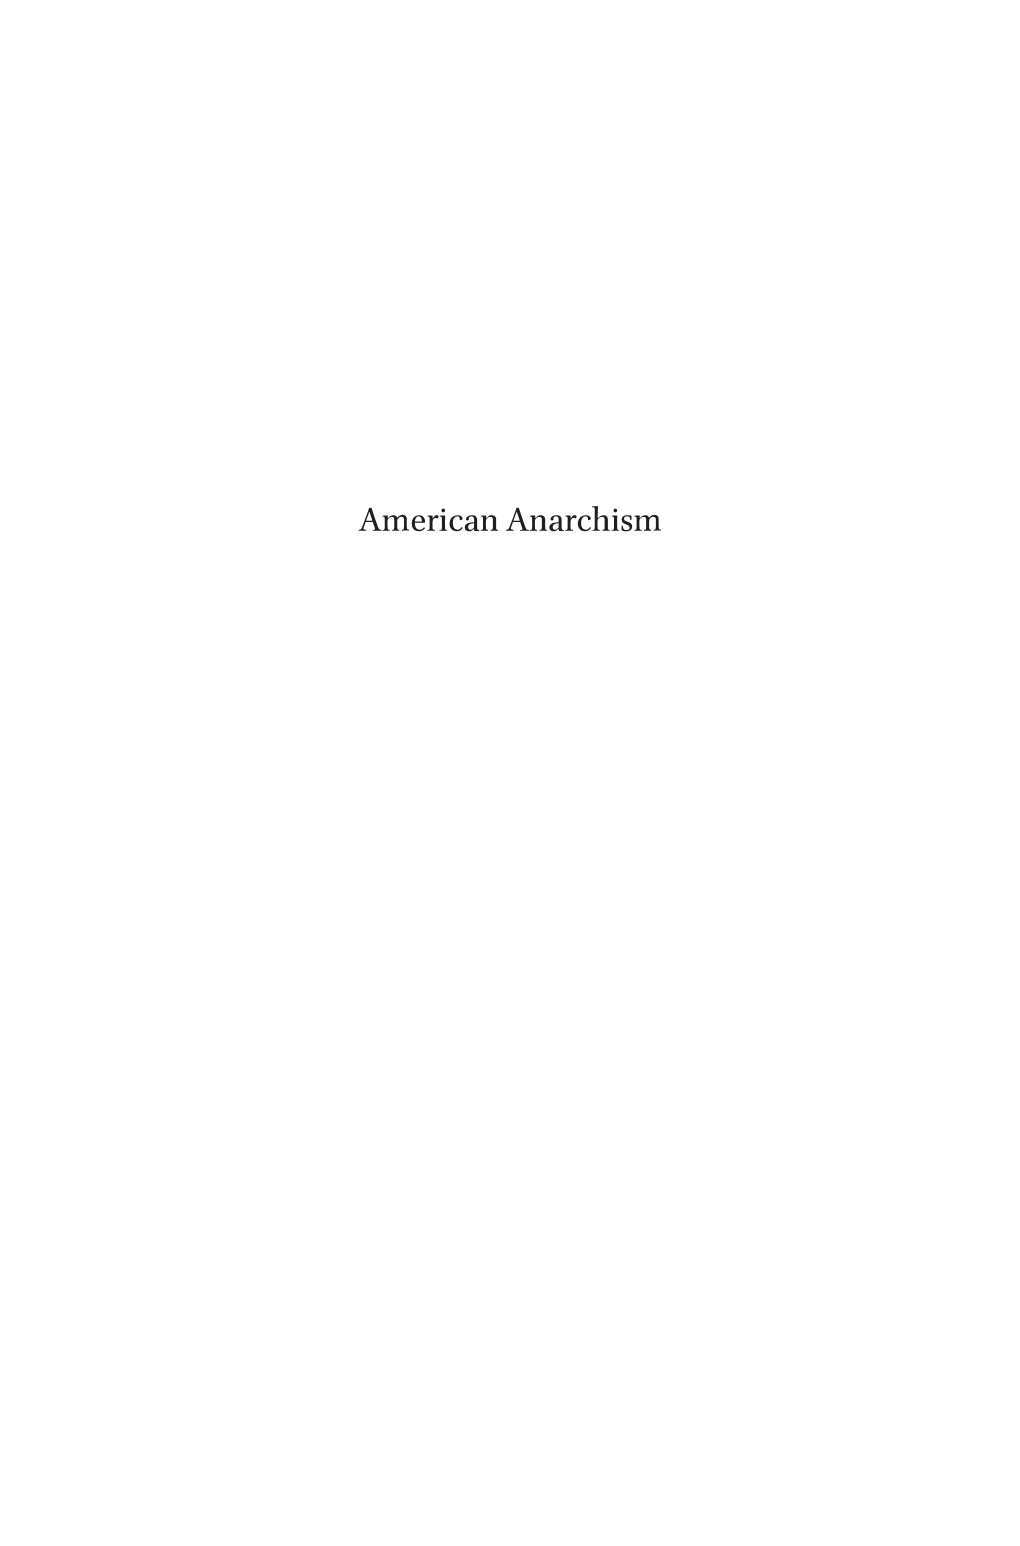 American Anarchism Studies in Critical Social Sciences